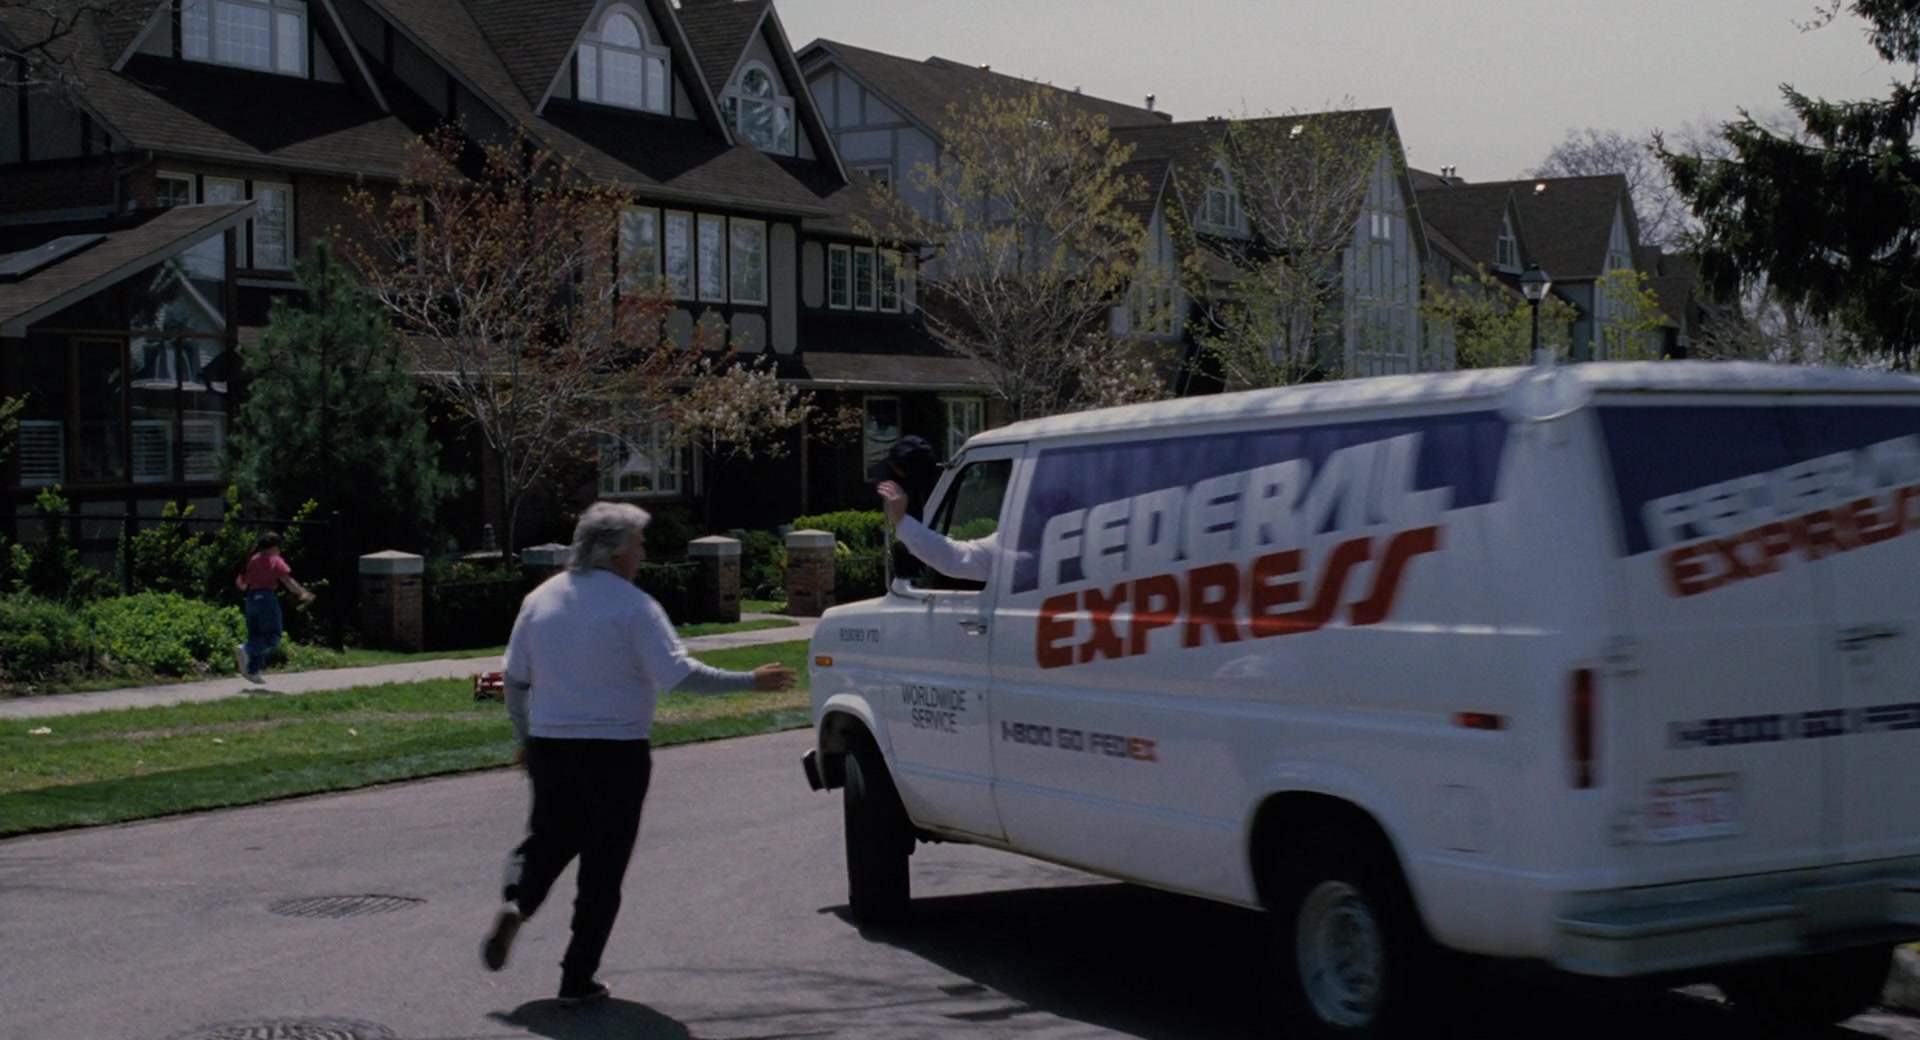 Federal Express Fedex In The Santa Clause 1994